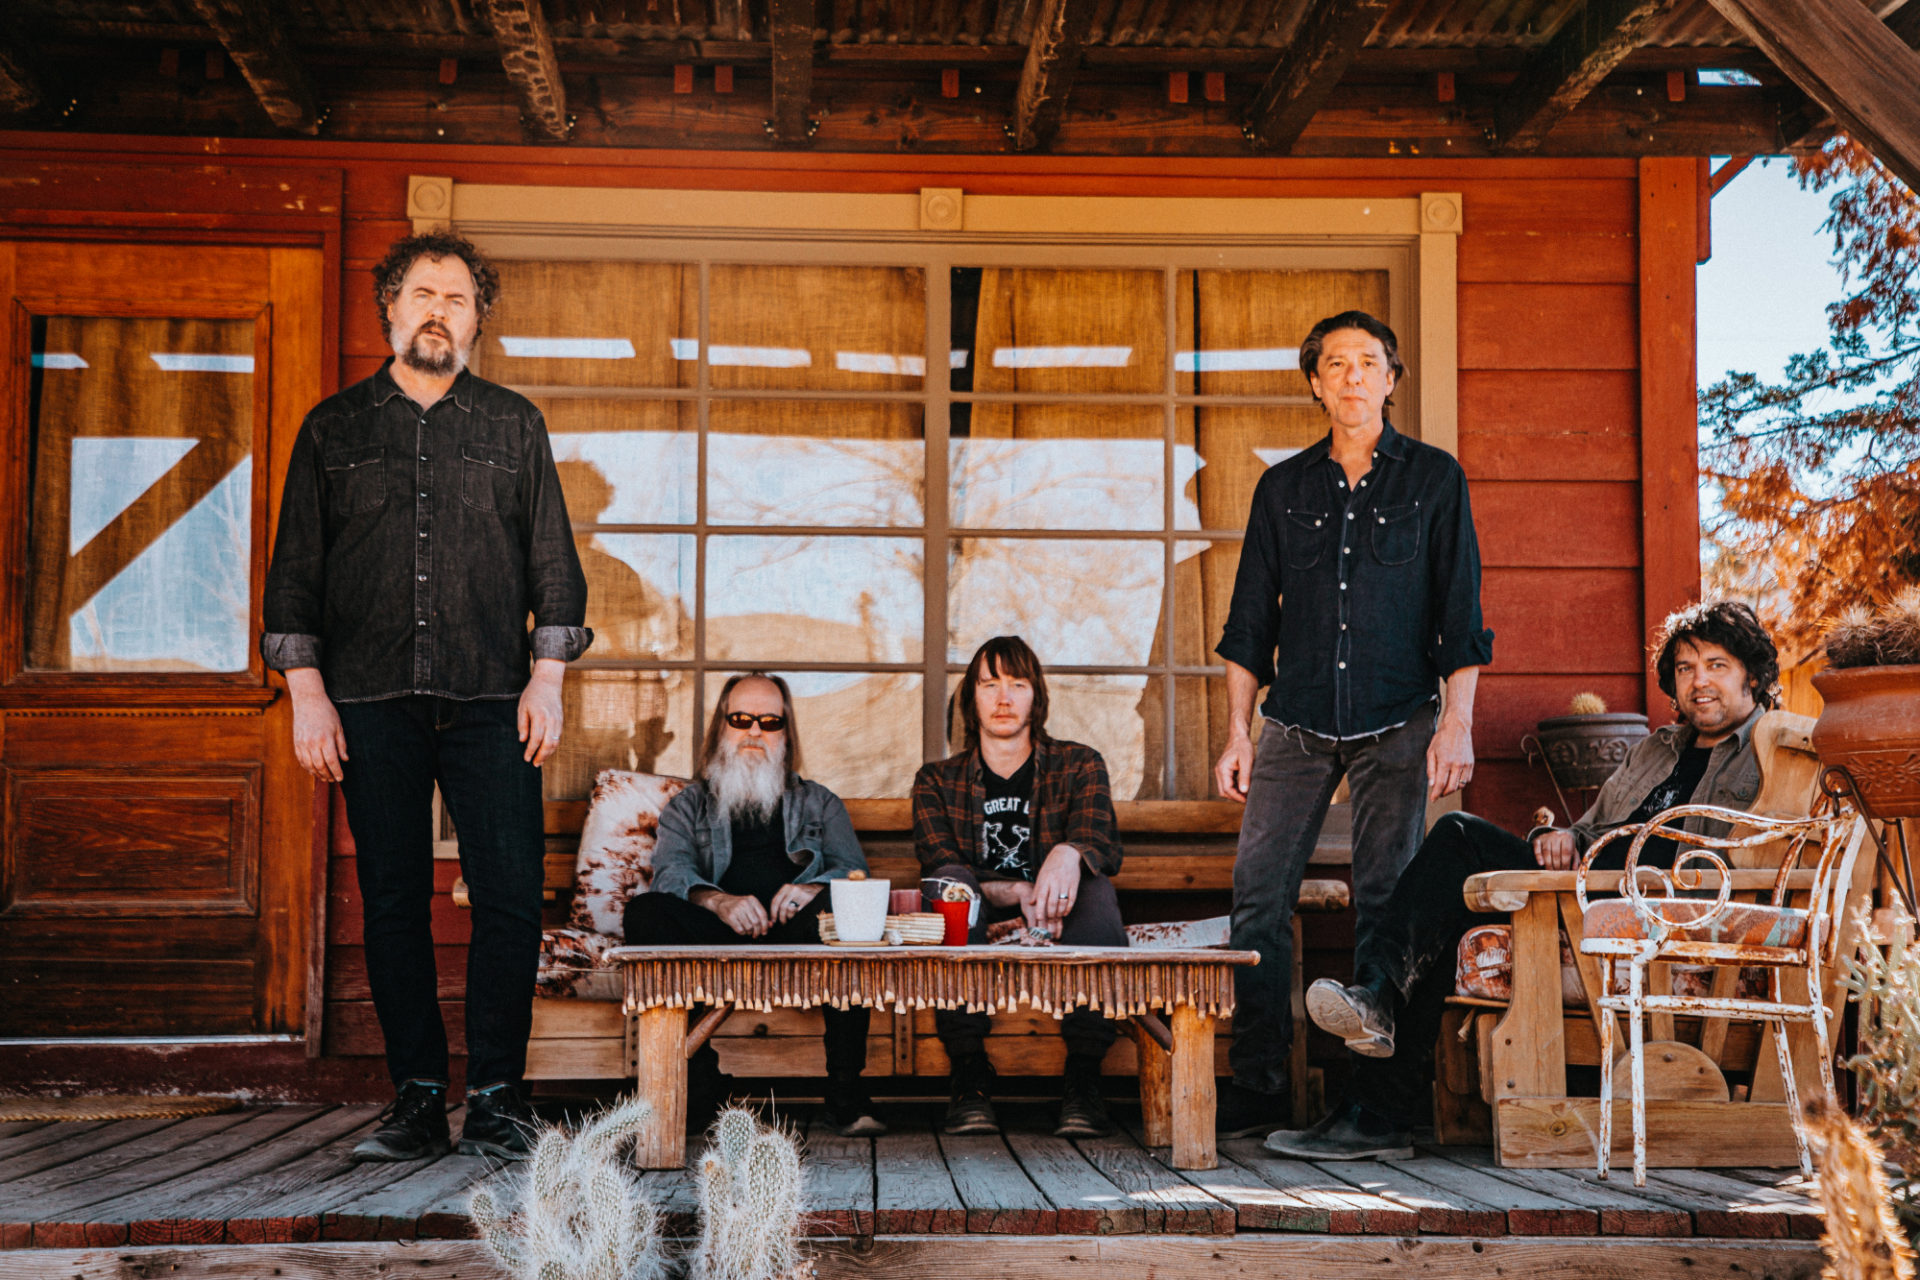 The band Drive-By Truckers are standing and seated on the porch of a wood house. They are five white-presenting men. Two are standing, two are seating on a couch, and one is seated in a chair.